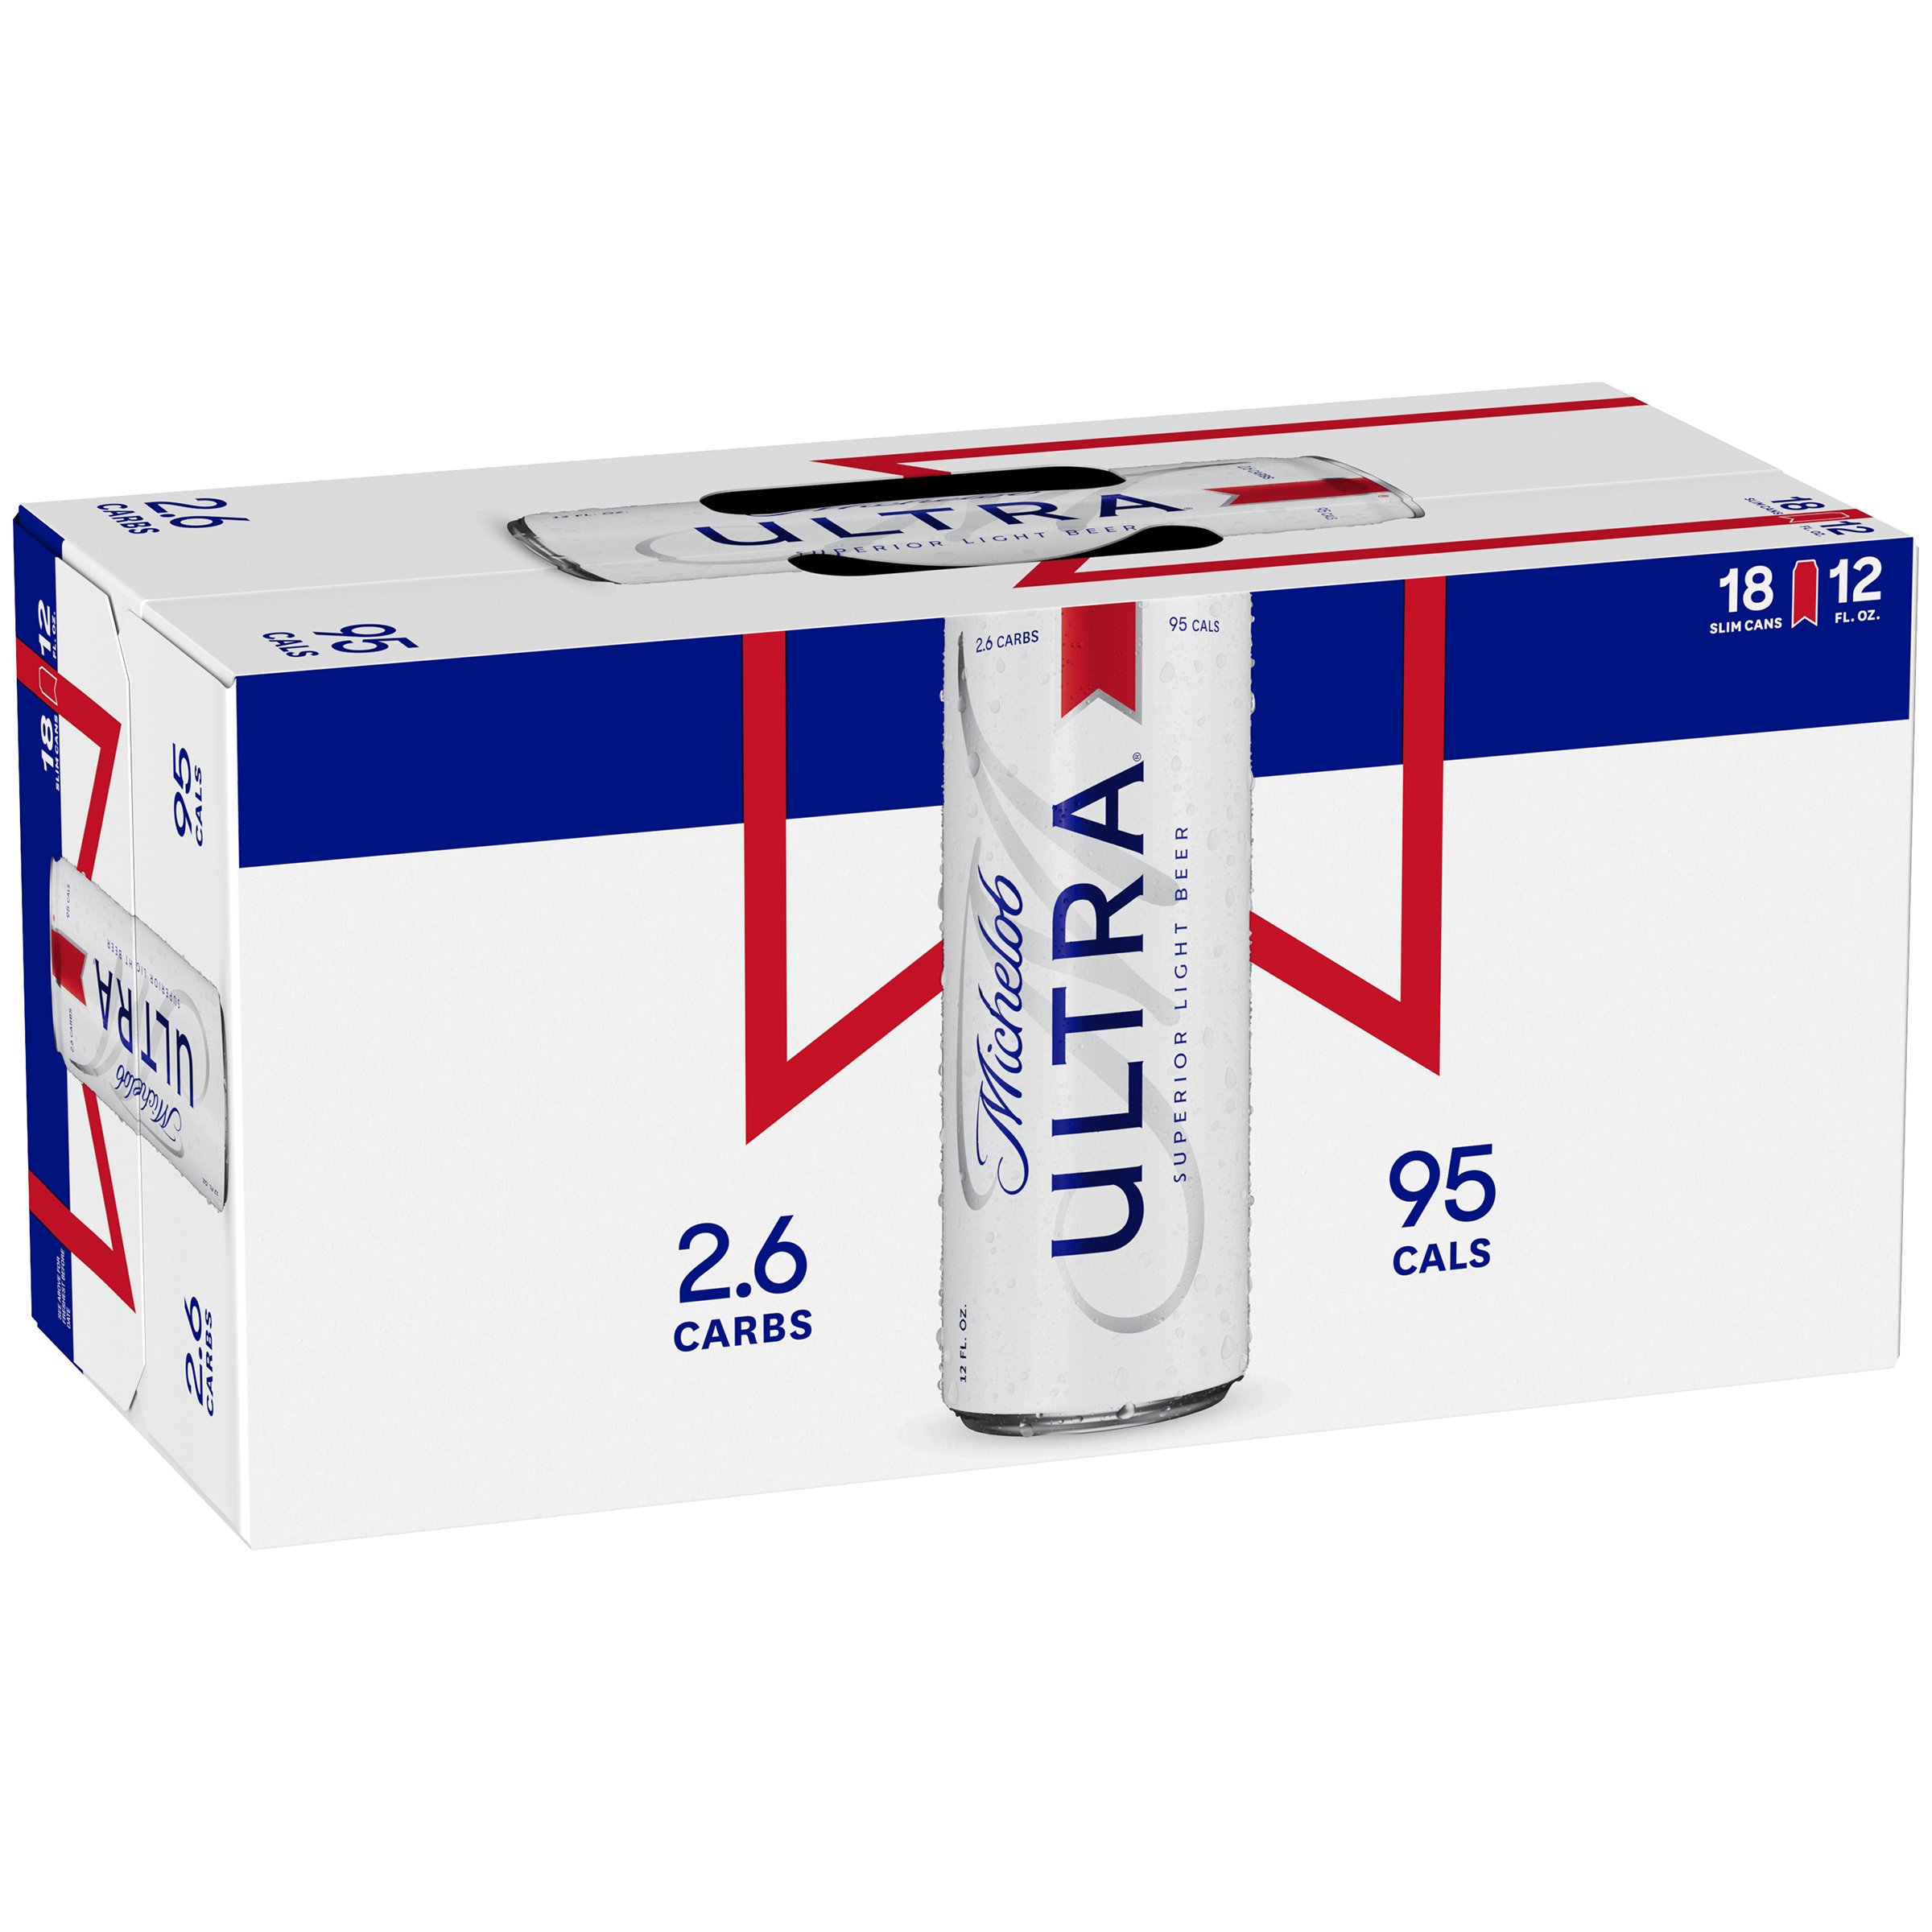 Michelob Ultra Beer 18 Pk Slim Cans Shop Beer At H E B